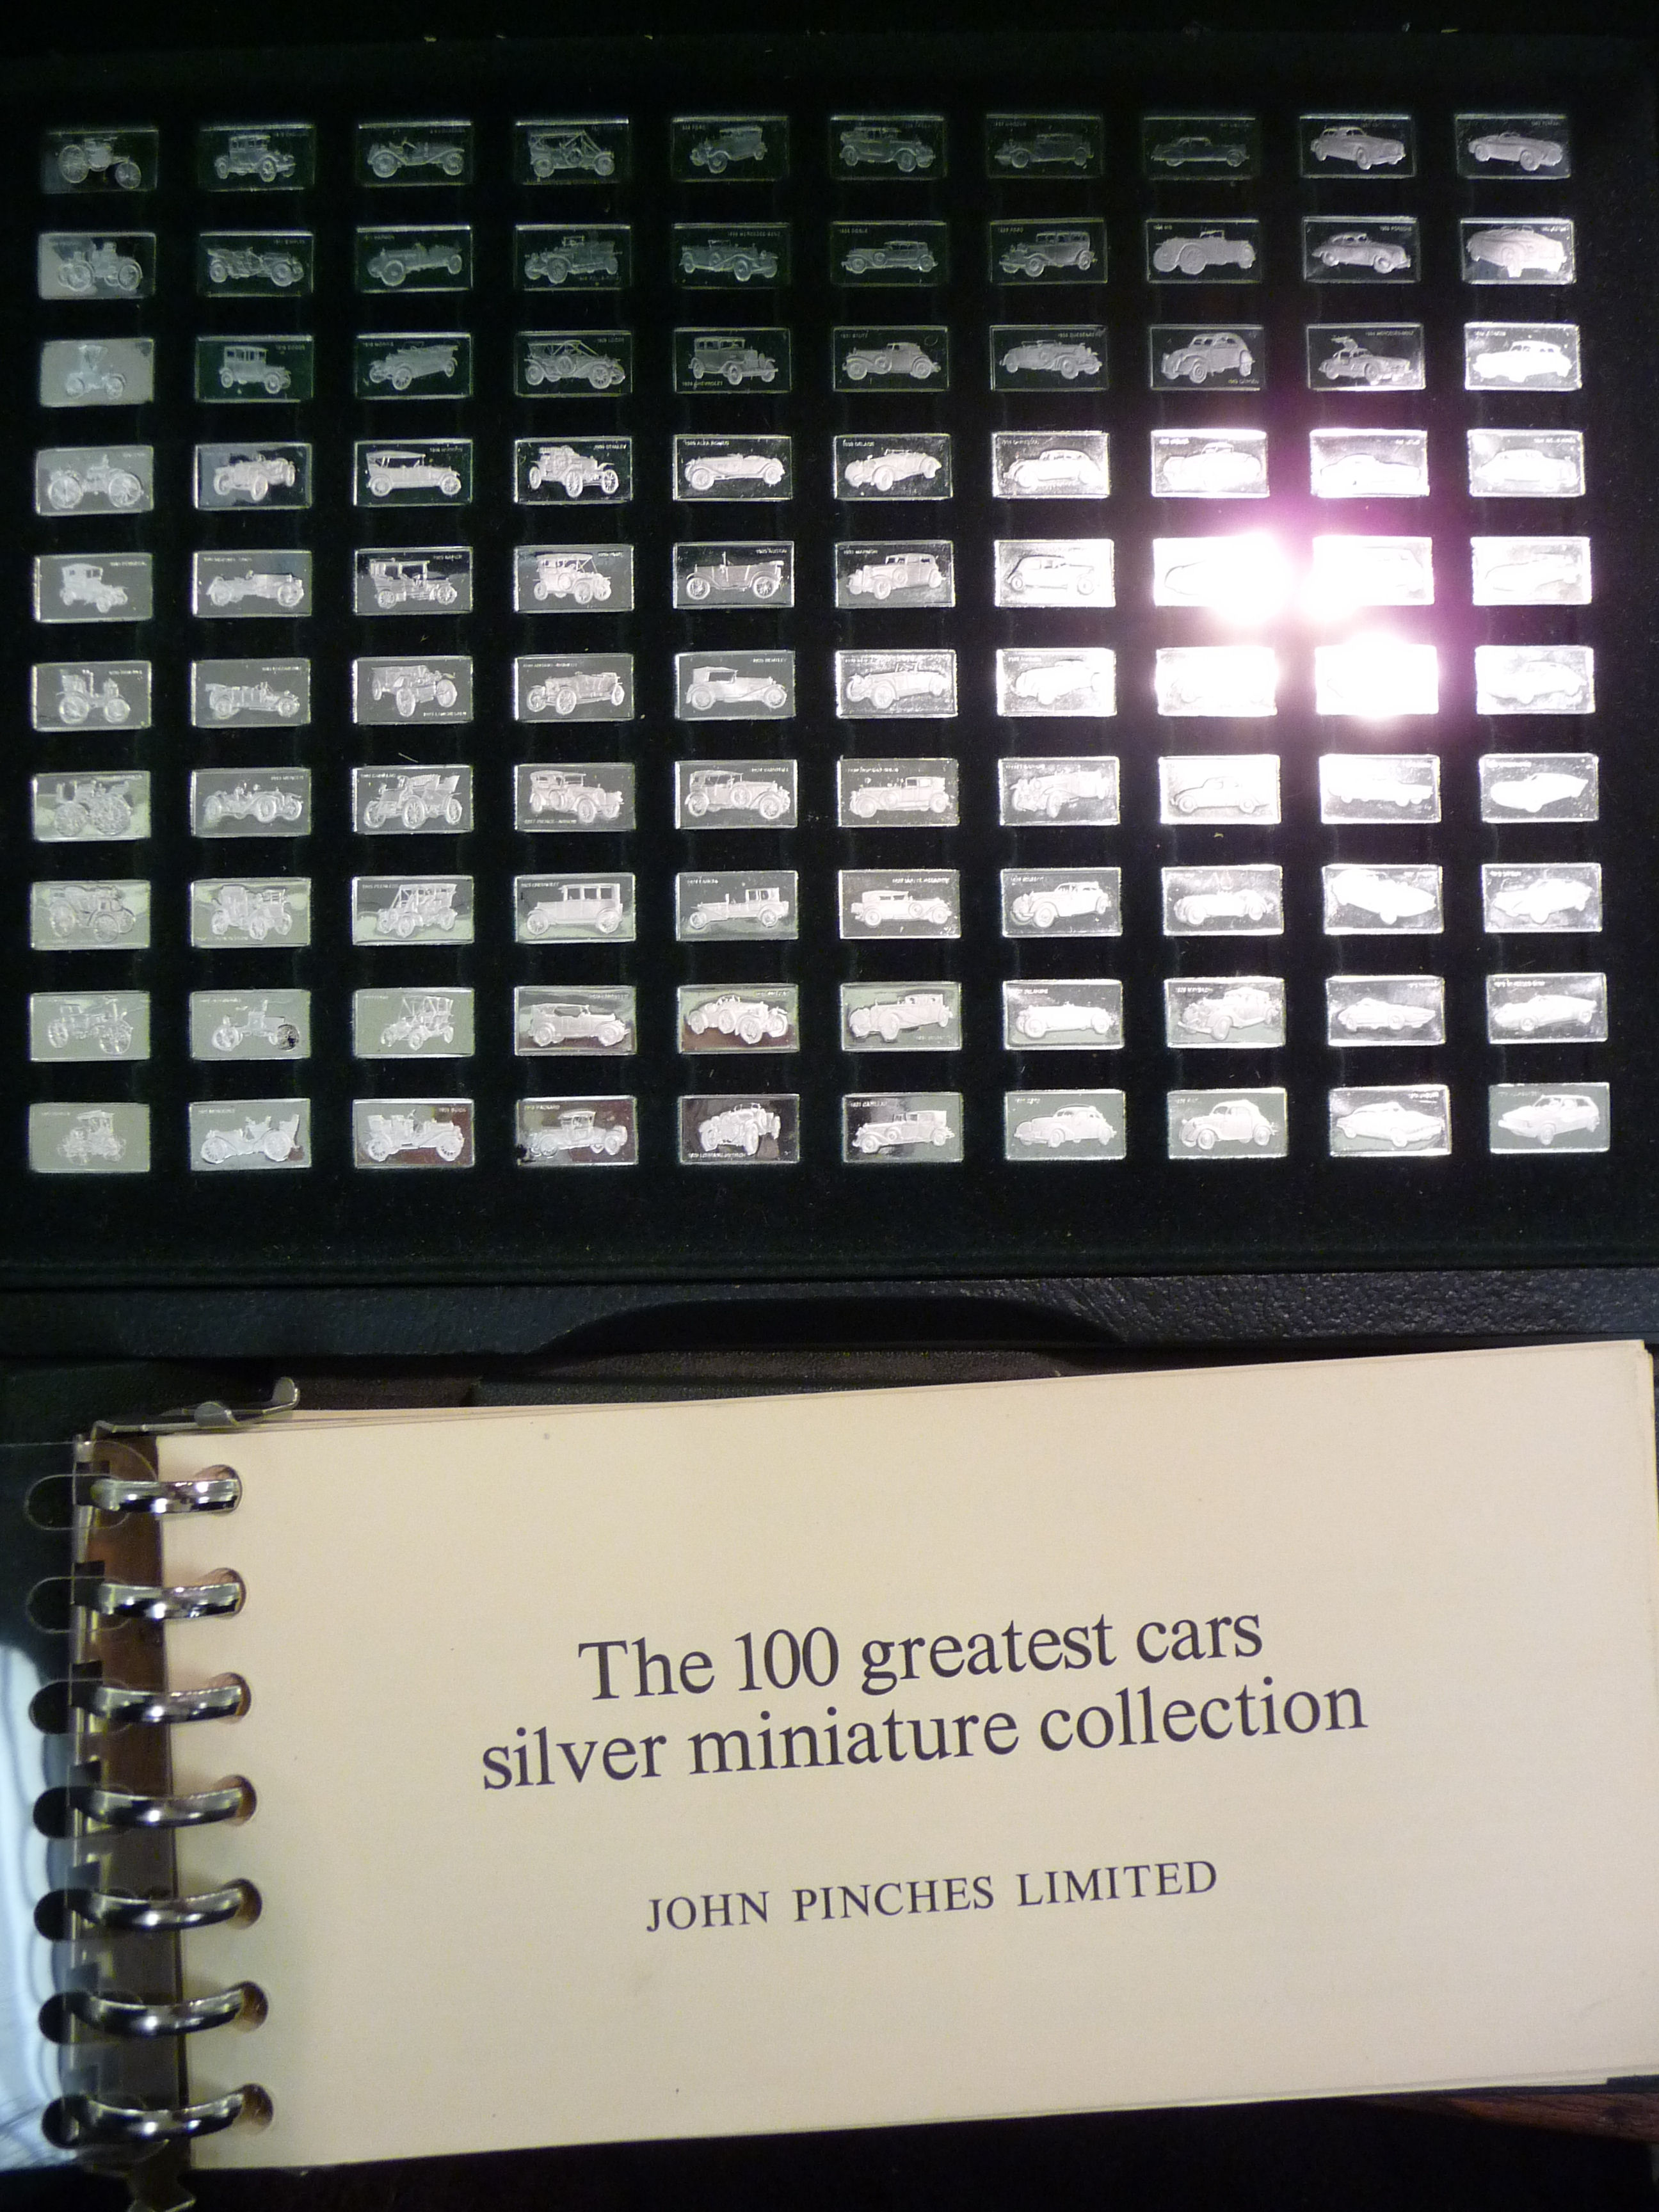 A 1975 John Pinches Ltd issue of one hundred silver mini ingots, featuring veteran,